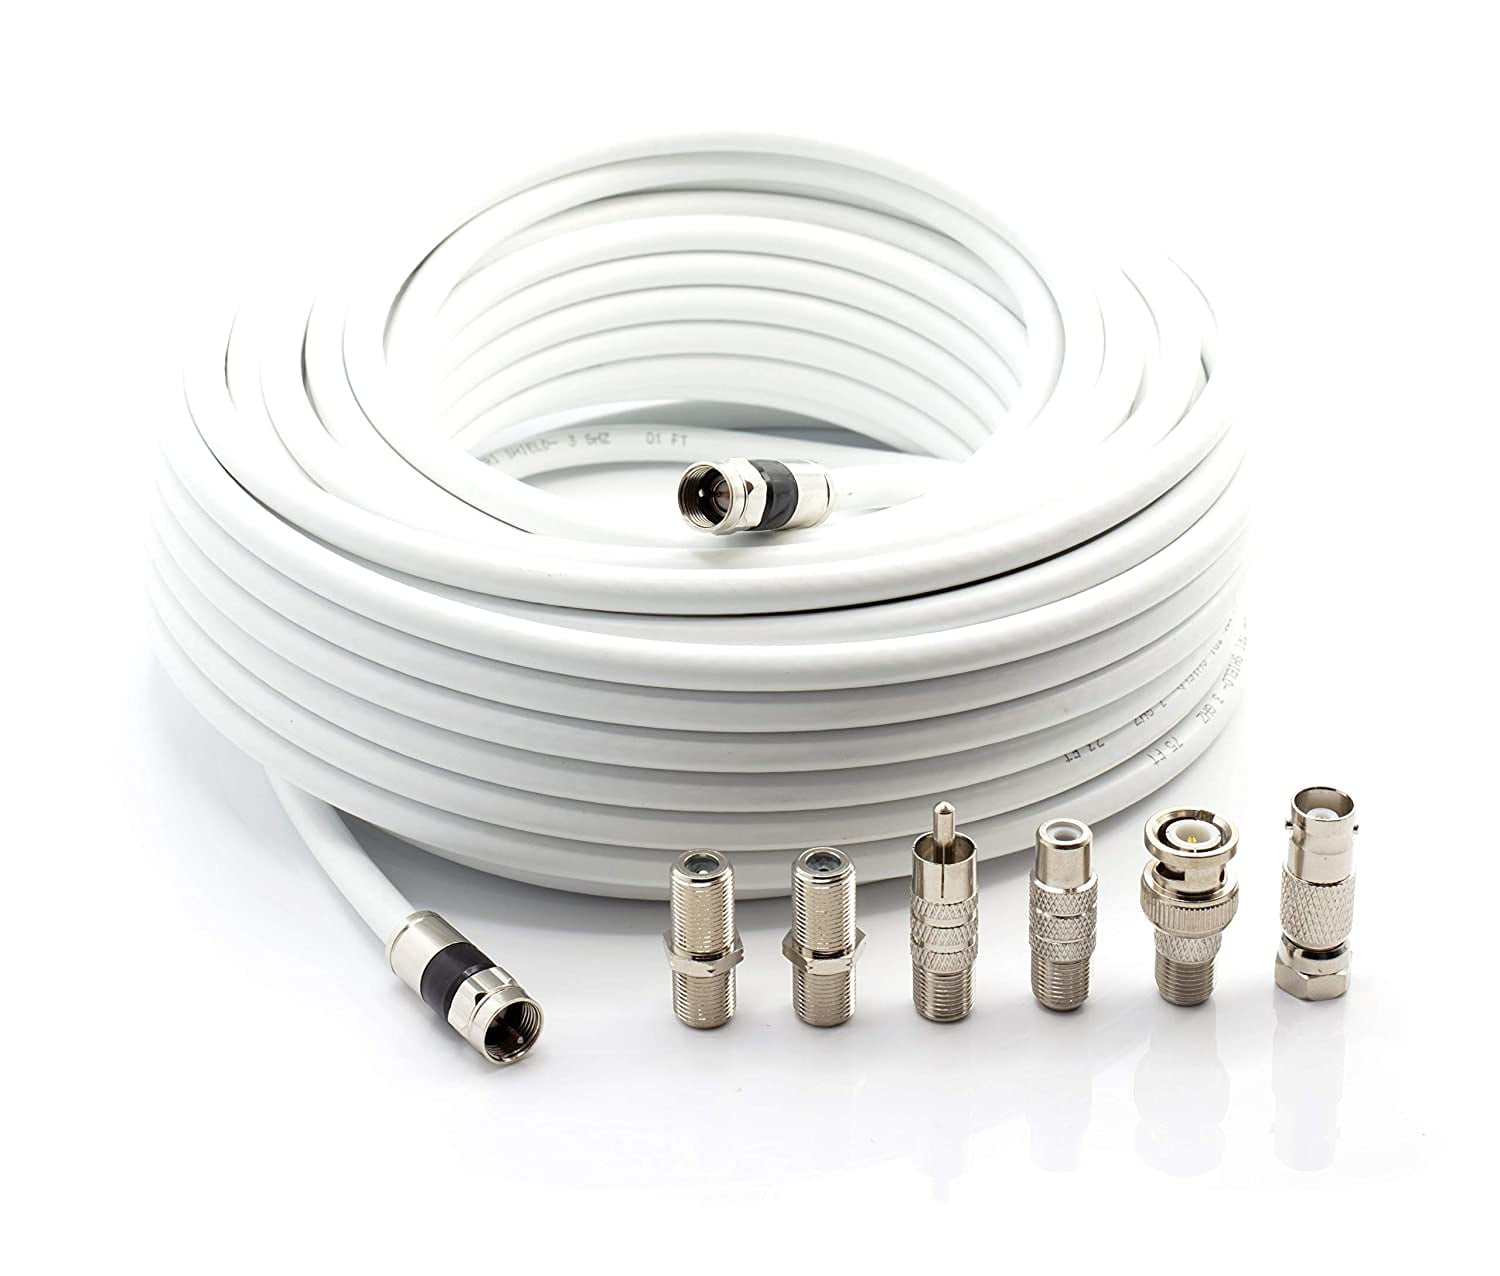 THE CIMPLE CO - 50' RG6 White & 6 Universal Coaxial Cable Connector Ends - F81 RCA BNC Adapters